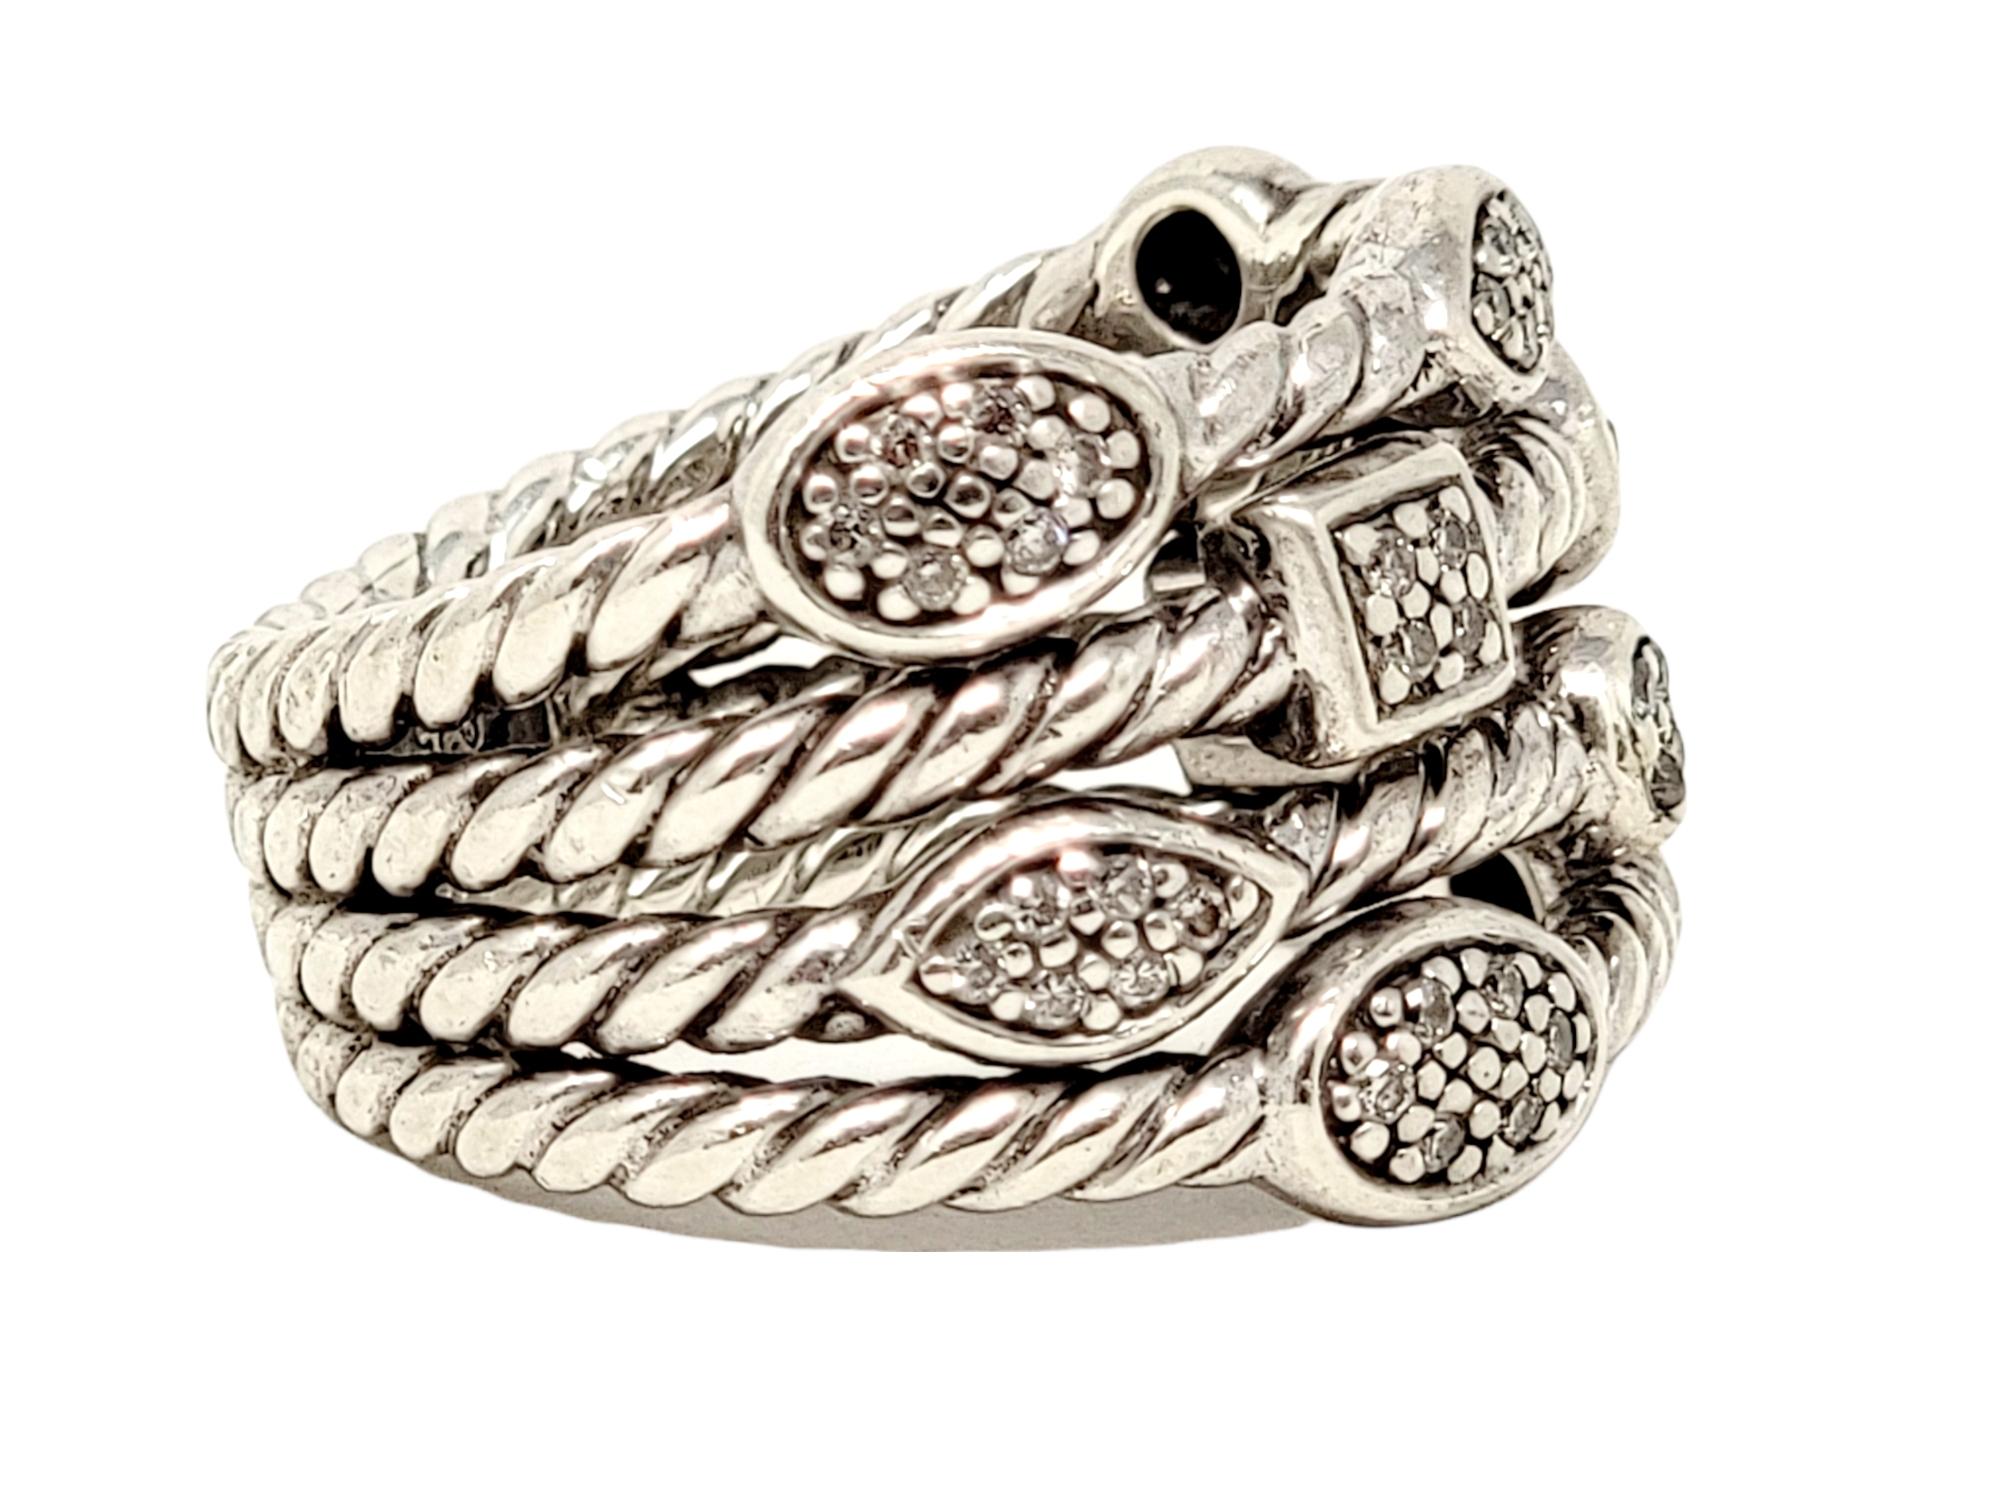 Ring size: 5.75

Gorgeous contemporary cable ring by jewelry designer, David Yurman. It features his signature twisted cable design in sterling silver accented by assorted shaped pave diamond stations throughout. 

Metal: Sterling Silver
Size: